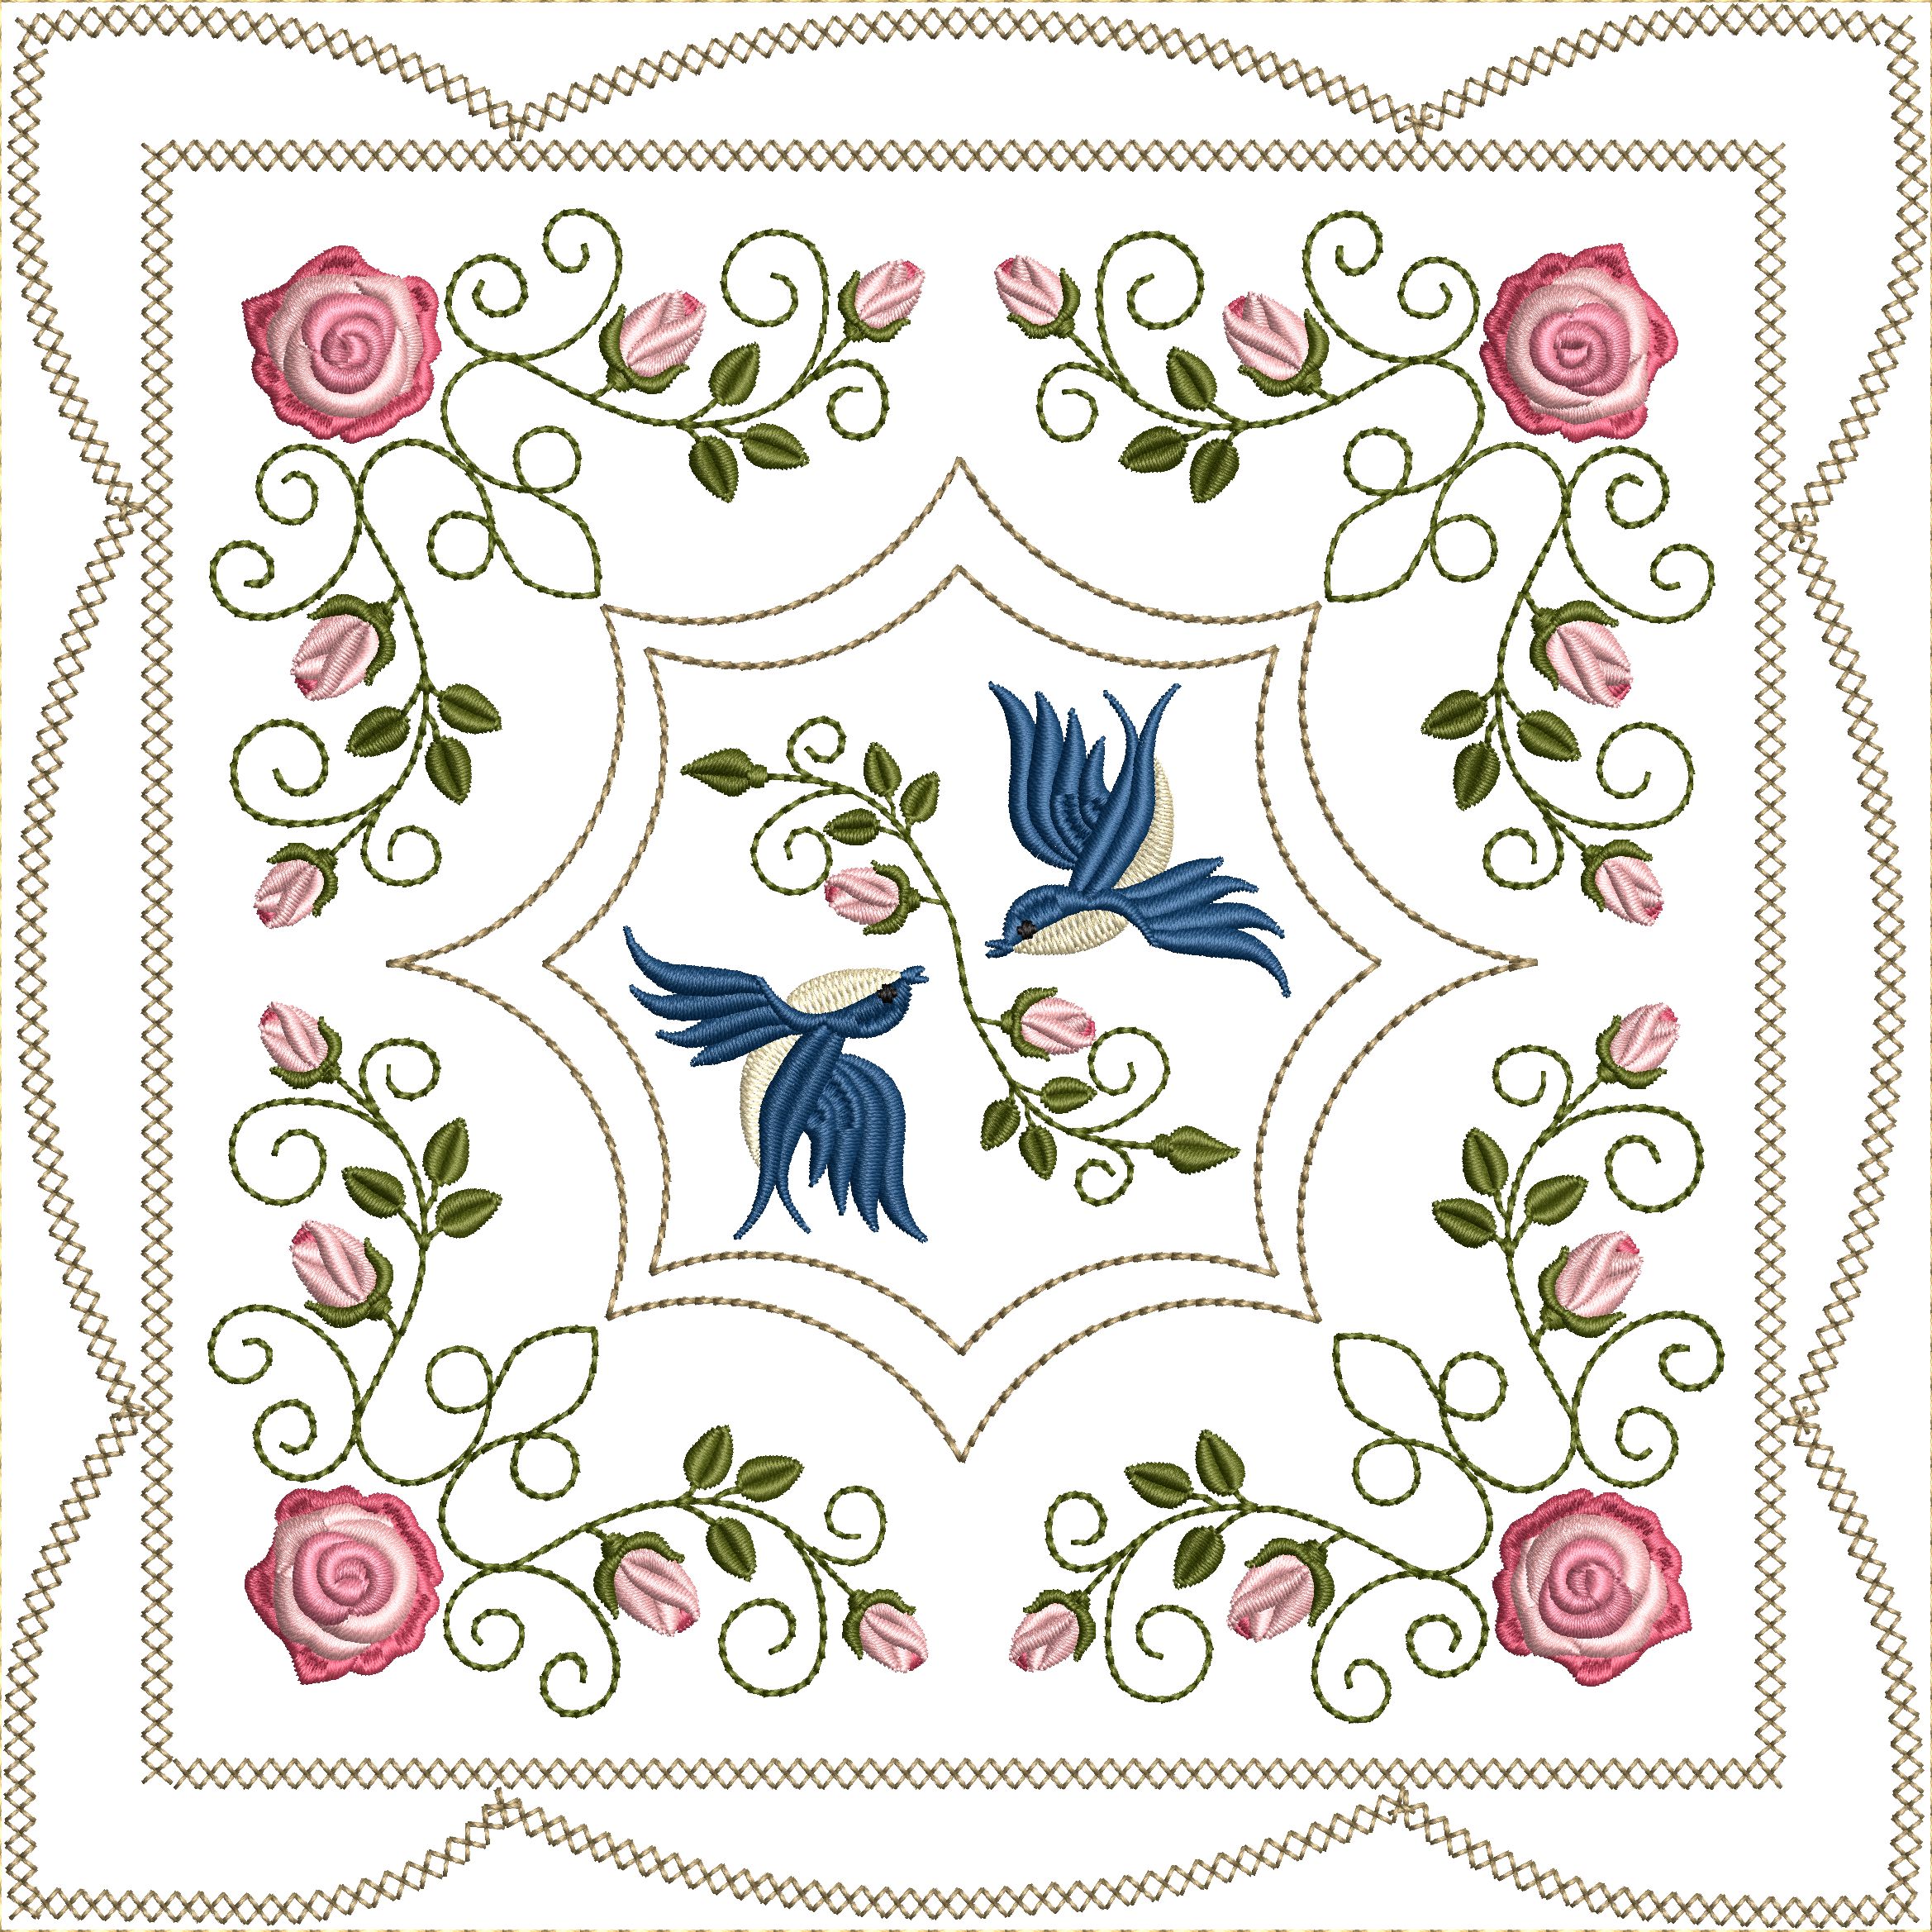 Bluebirds and Roses Quilt Blocks 8x8-8